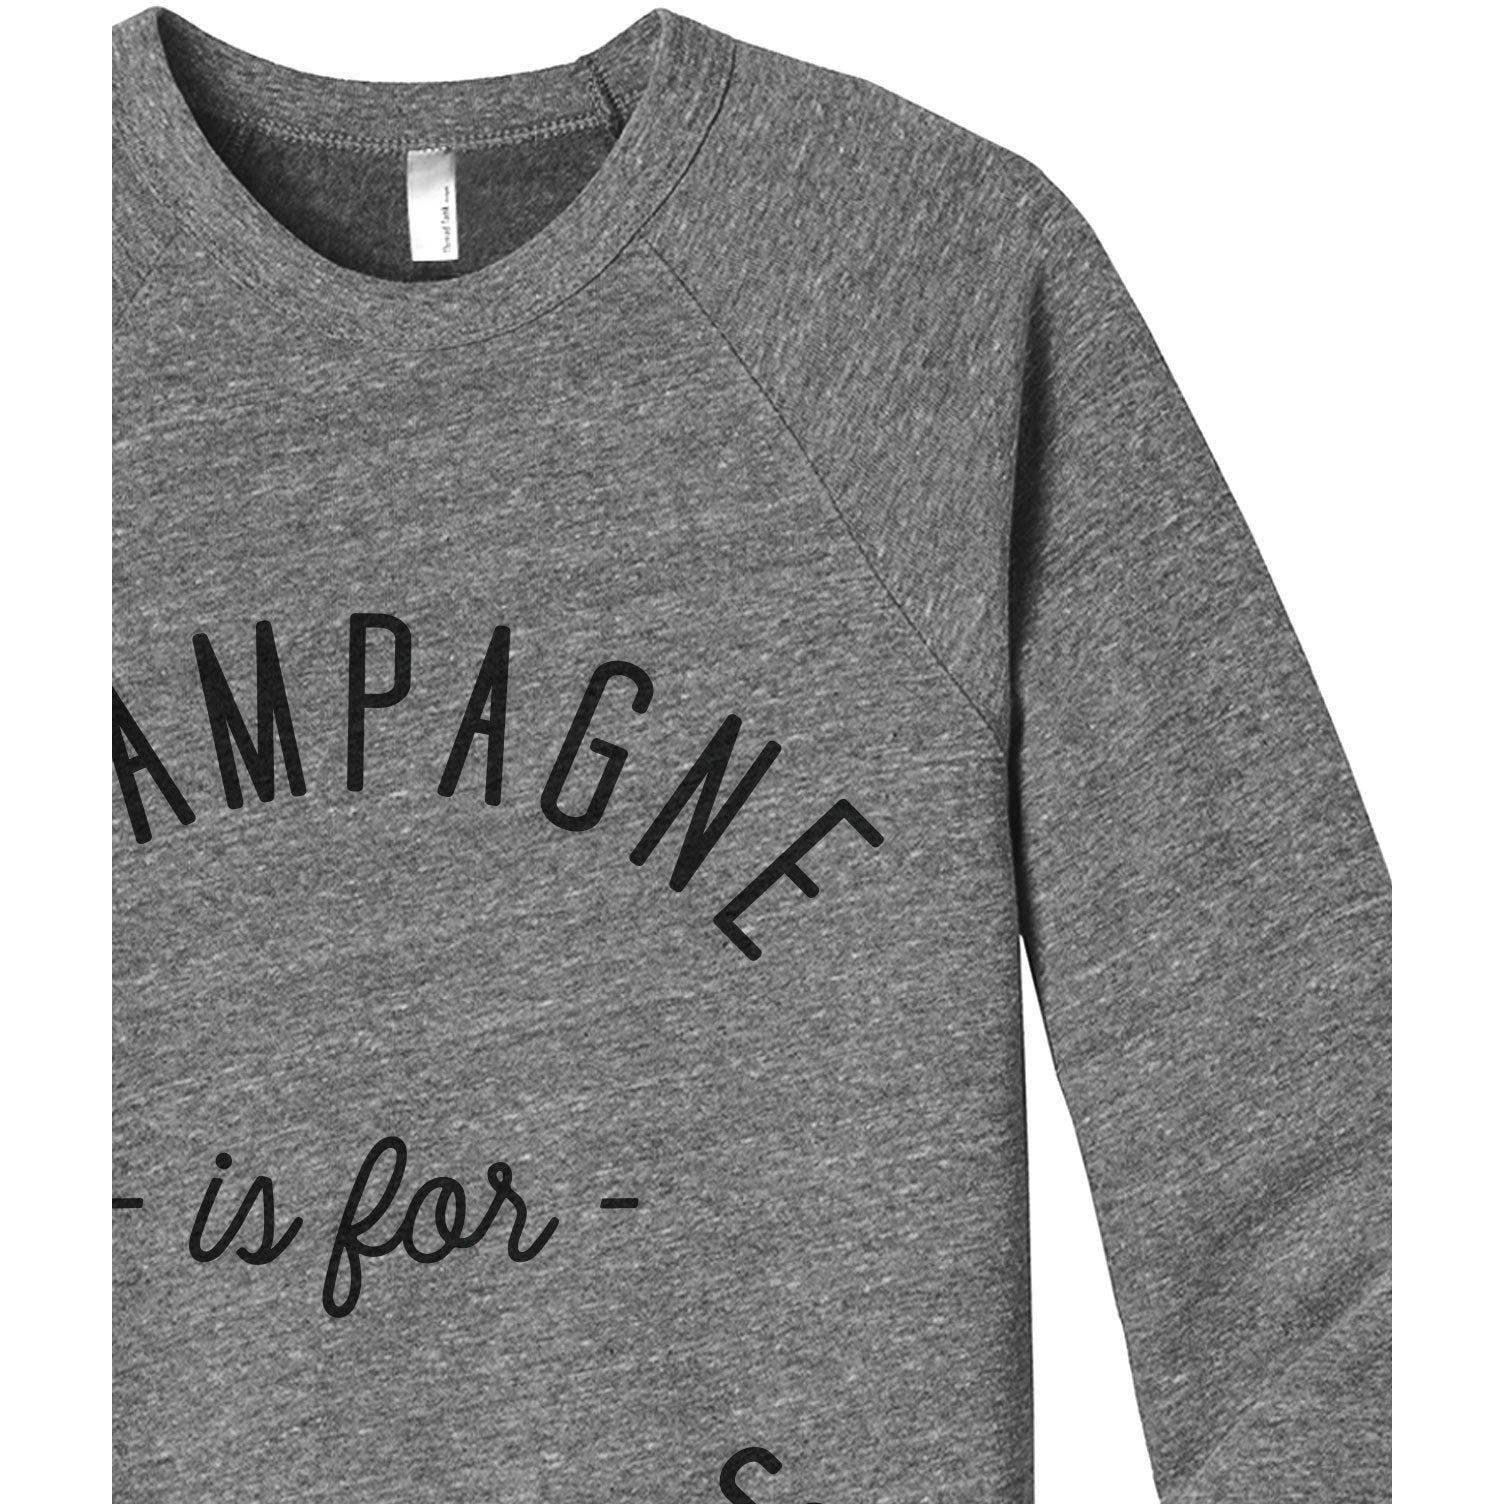 Champagne Is For Champions Women's Cozy Fleece Longsleeves Sweater Heather Grey Closeup Details